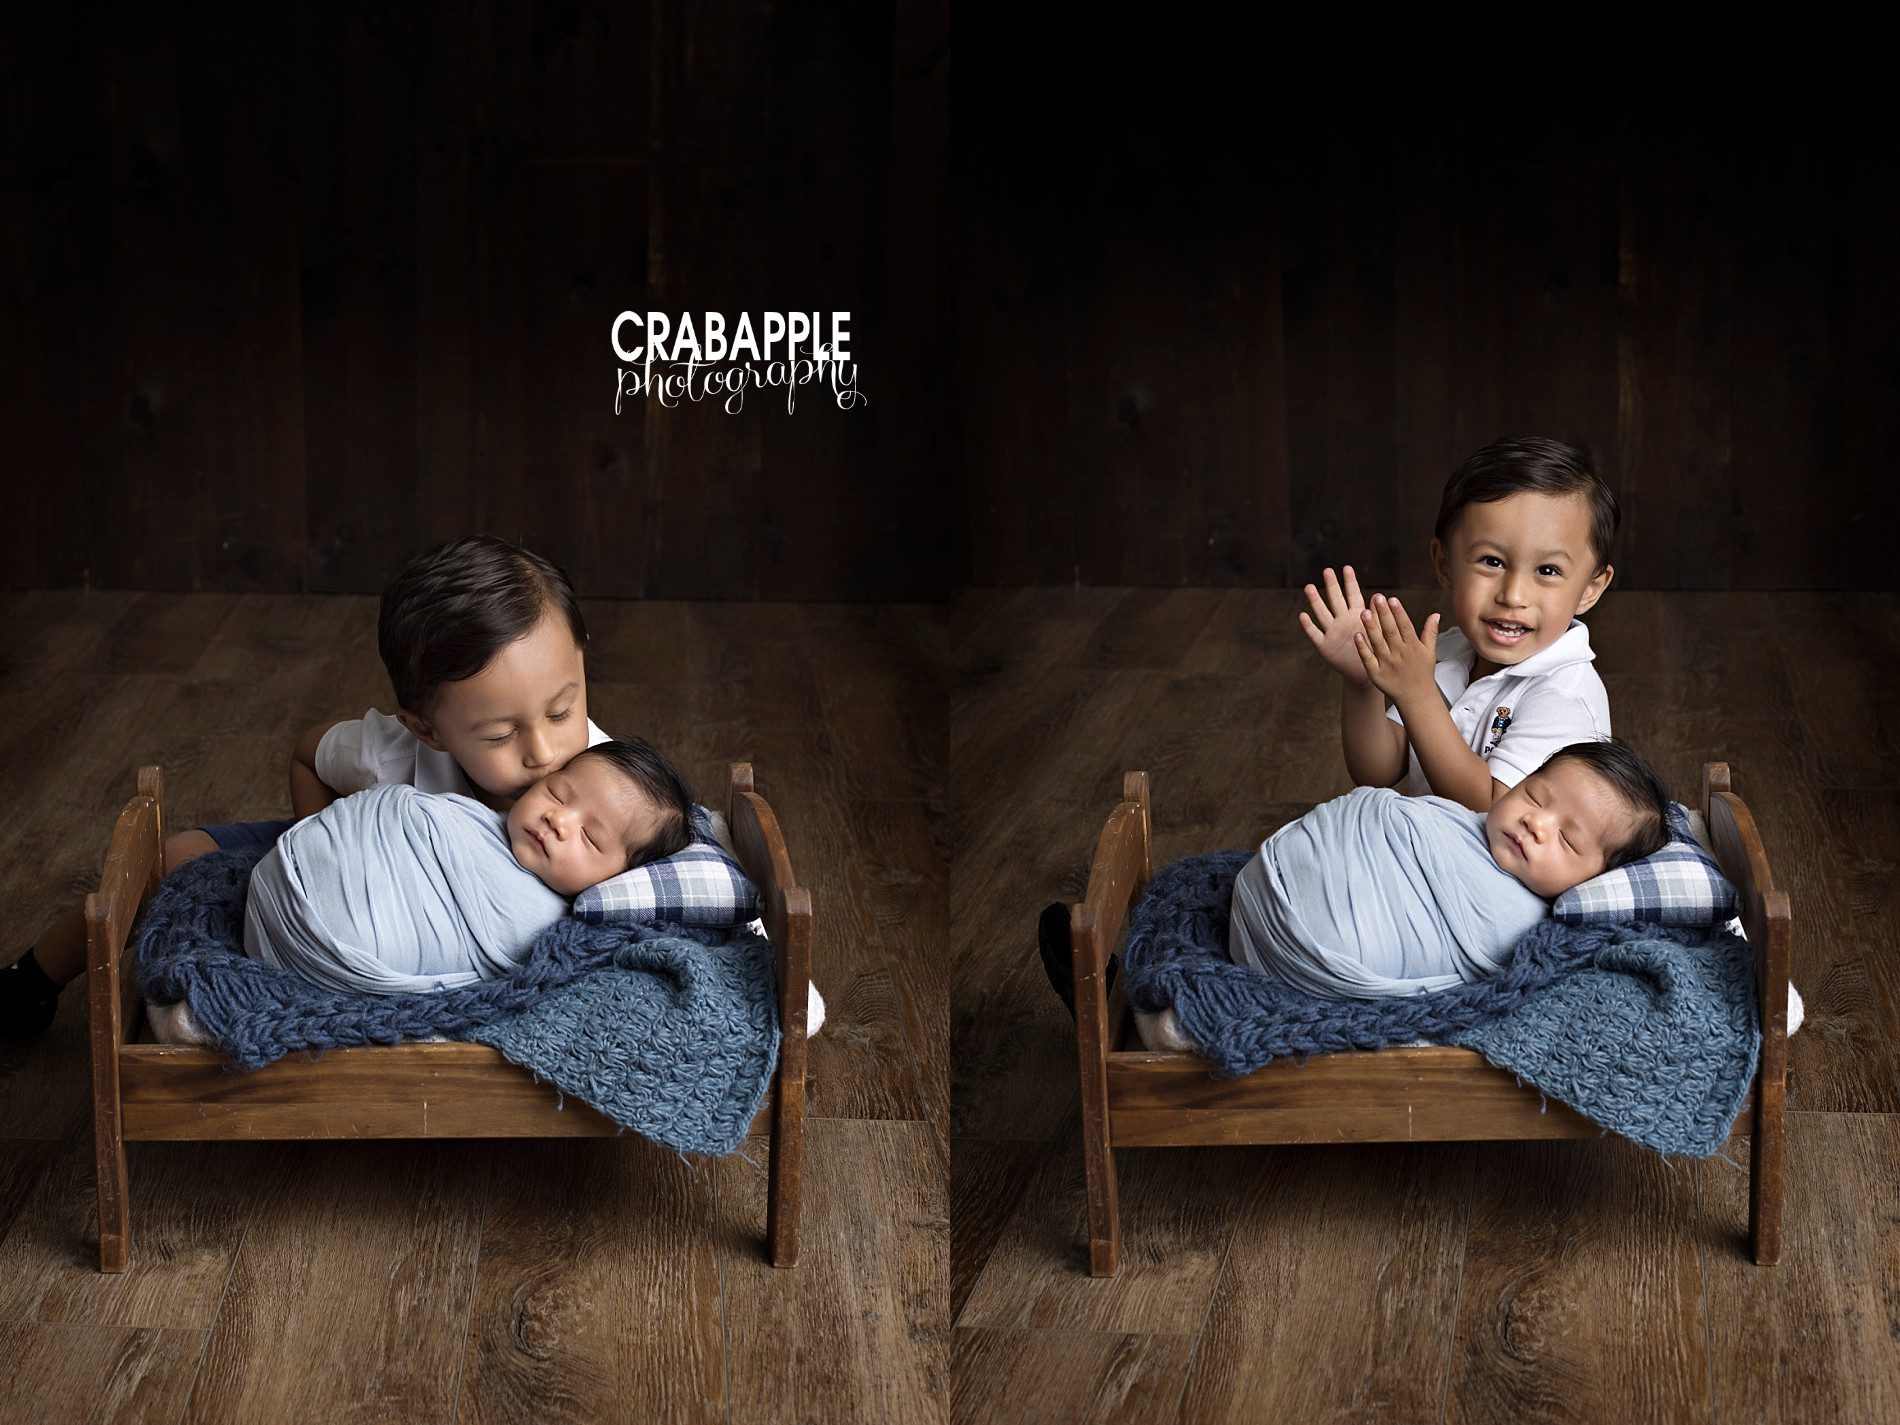 sibling photo ideas with newborn baby how to pose